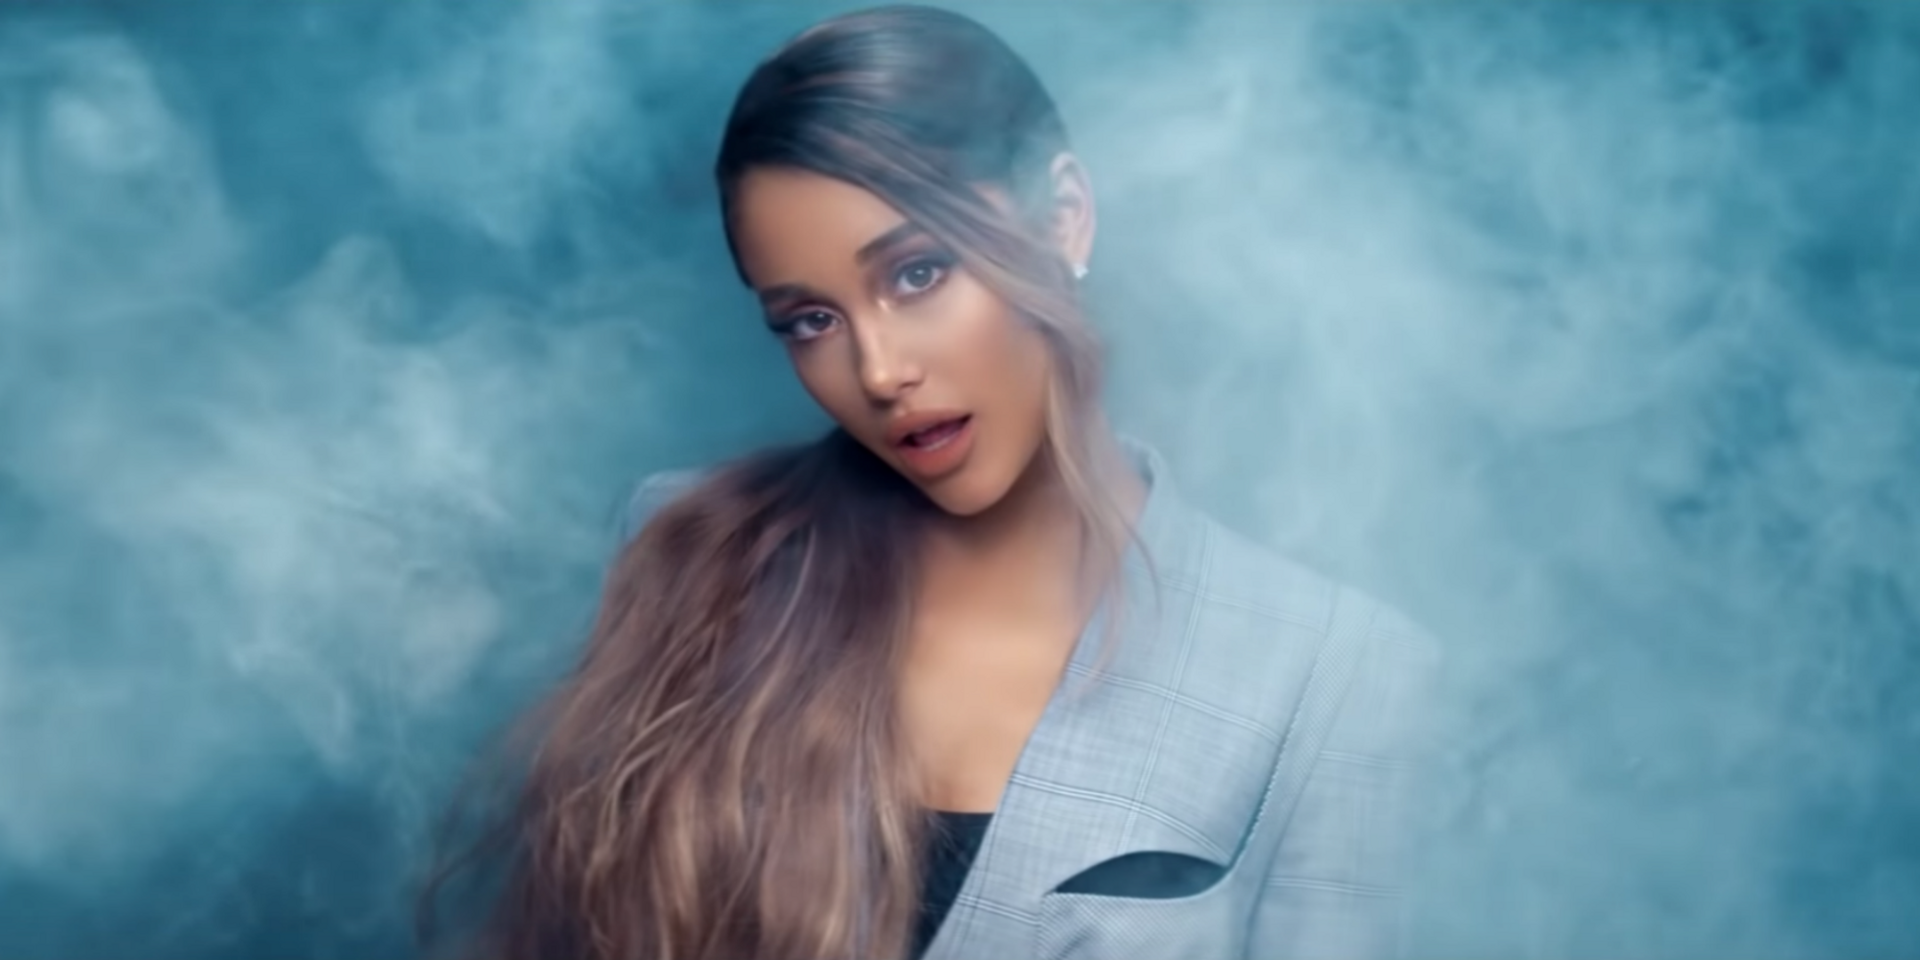 Ariana Grande showcases her emotional strength in a new music video 'Breathin' - watch  